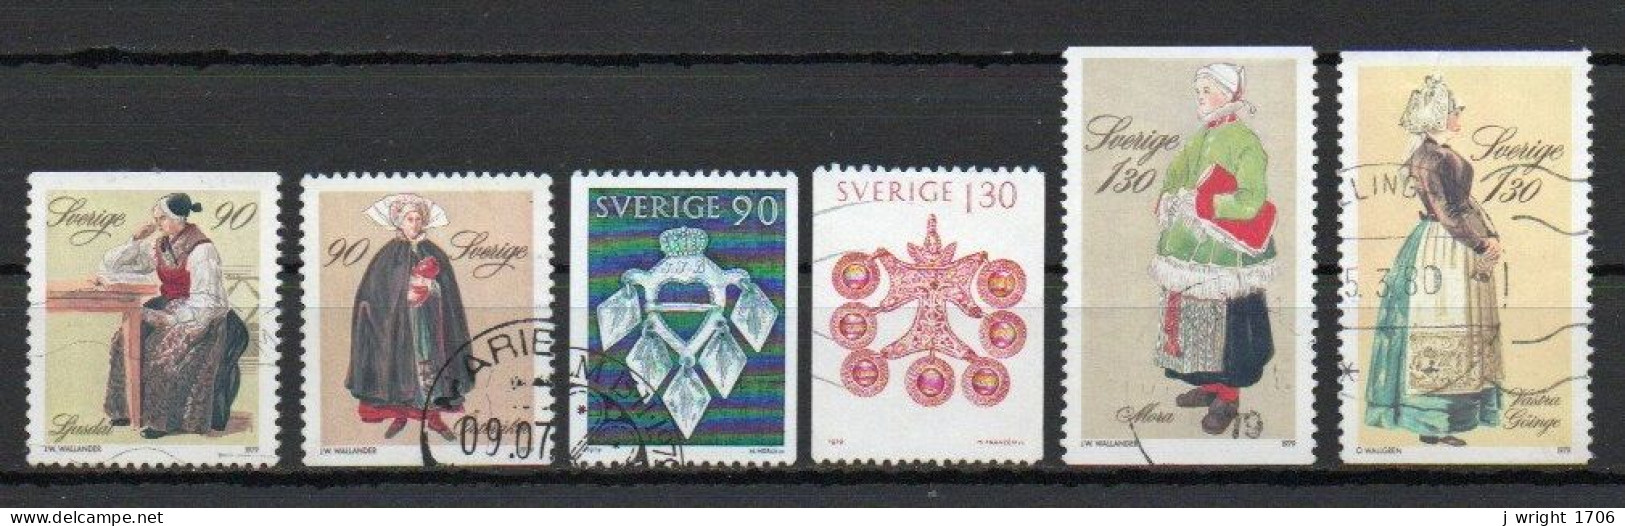 Sweden, 1979, Christmas/Costumes & Jewellery, Set, USED - Used Stamps